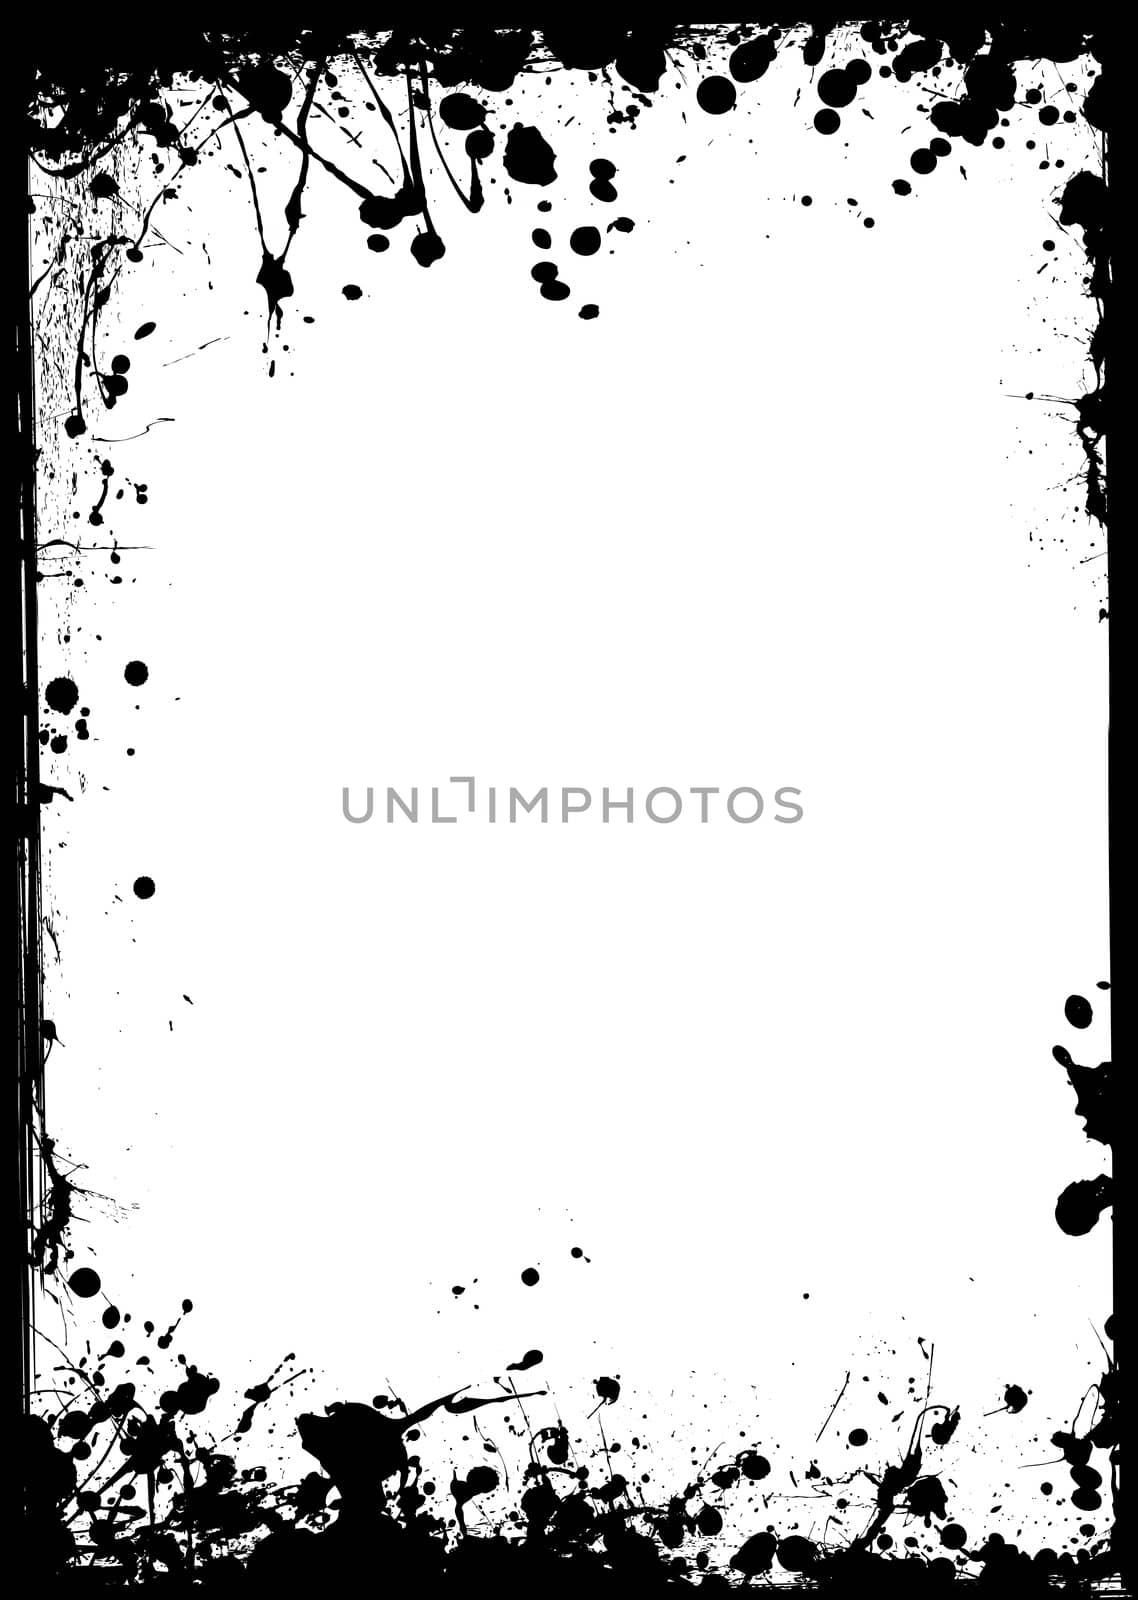 Black ink border with white center and ink splat